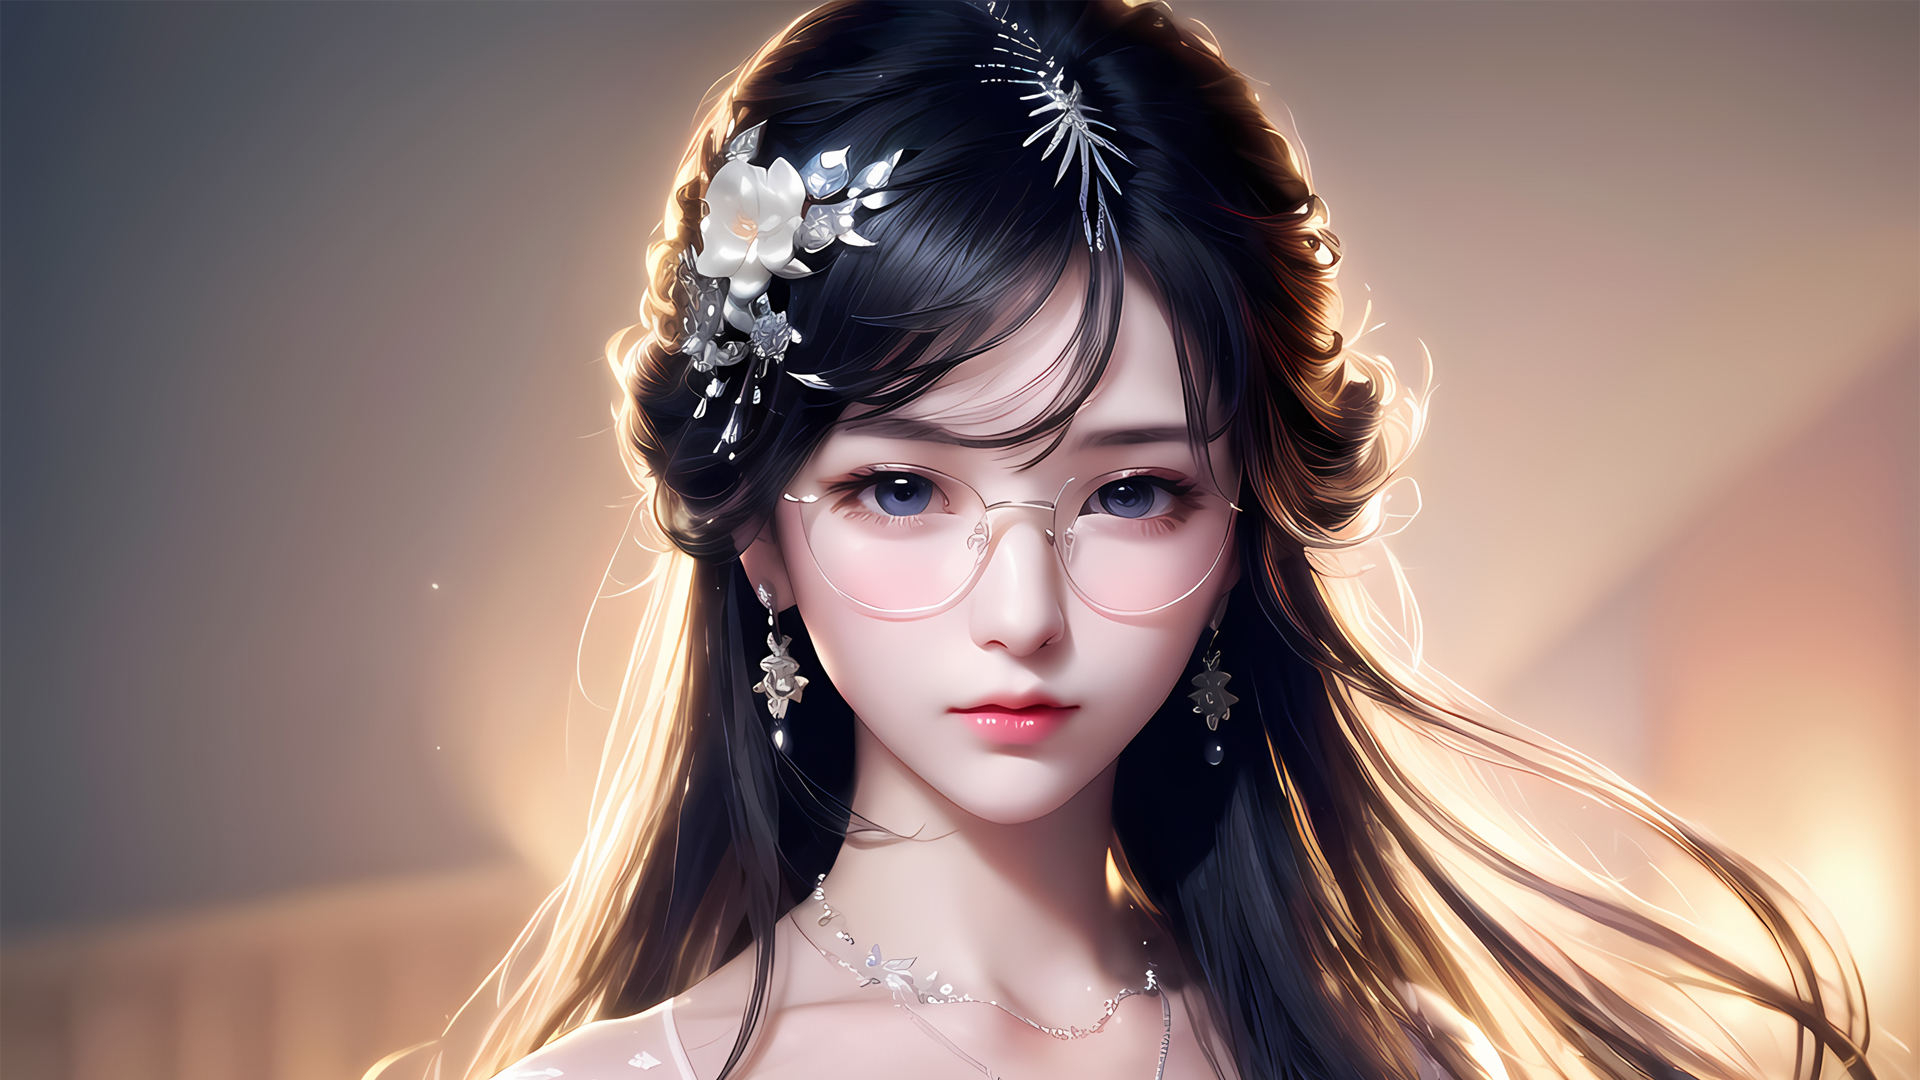 Spectacles Ai Art Earring Asian Women Long Hair Glasses Flower In Hair Looking At Viewer Simple Back 1920x1080